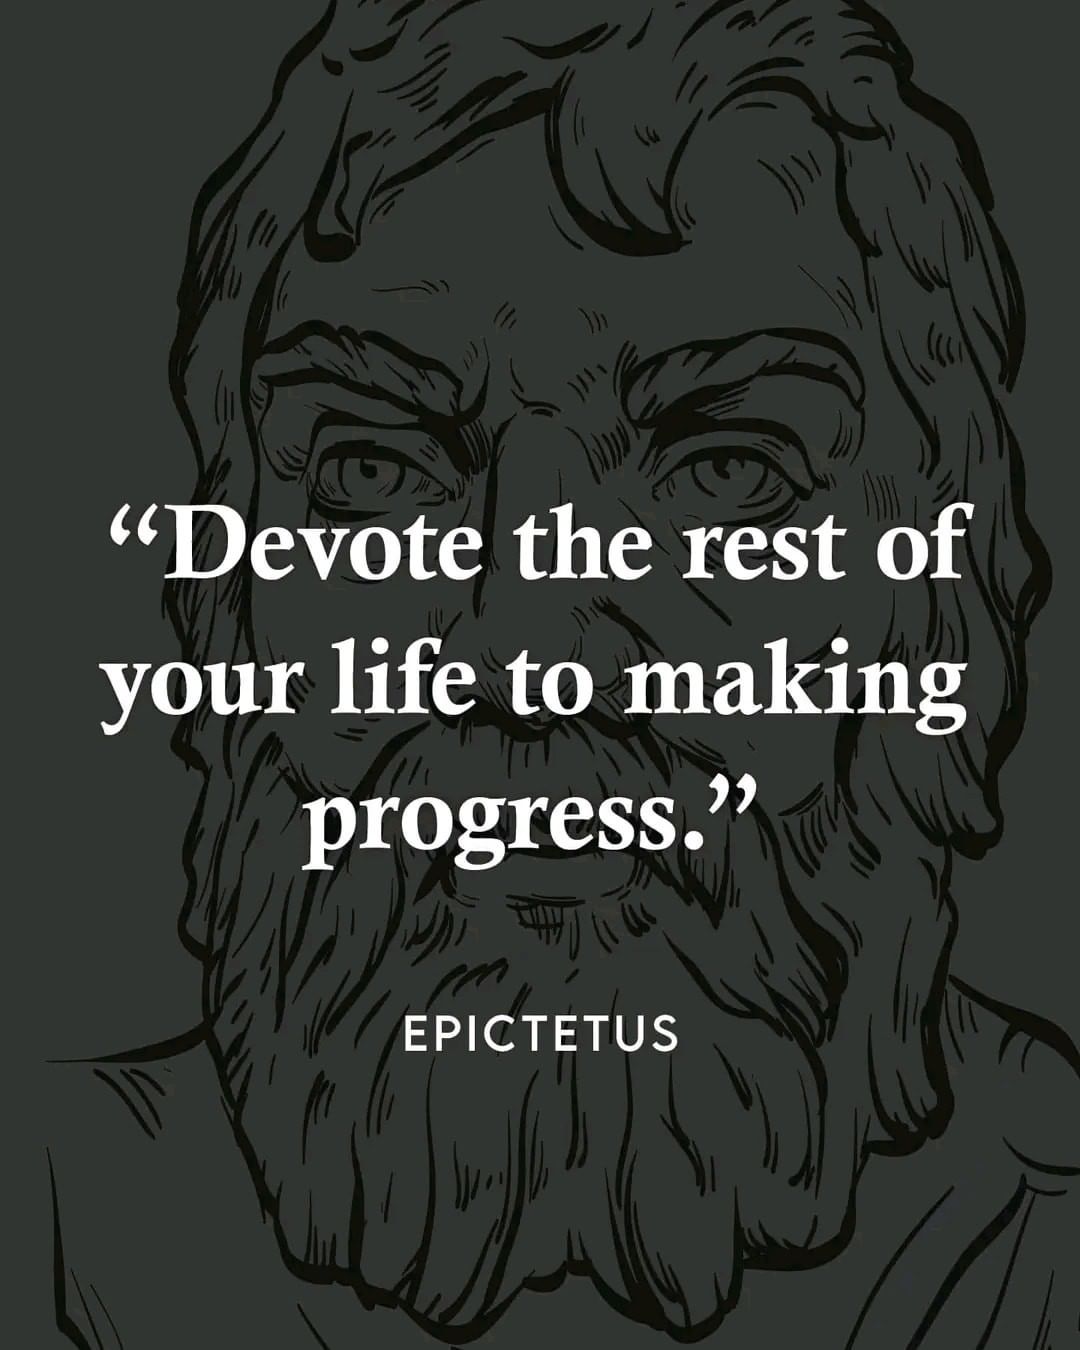 Devote the rest of your life to making progress.